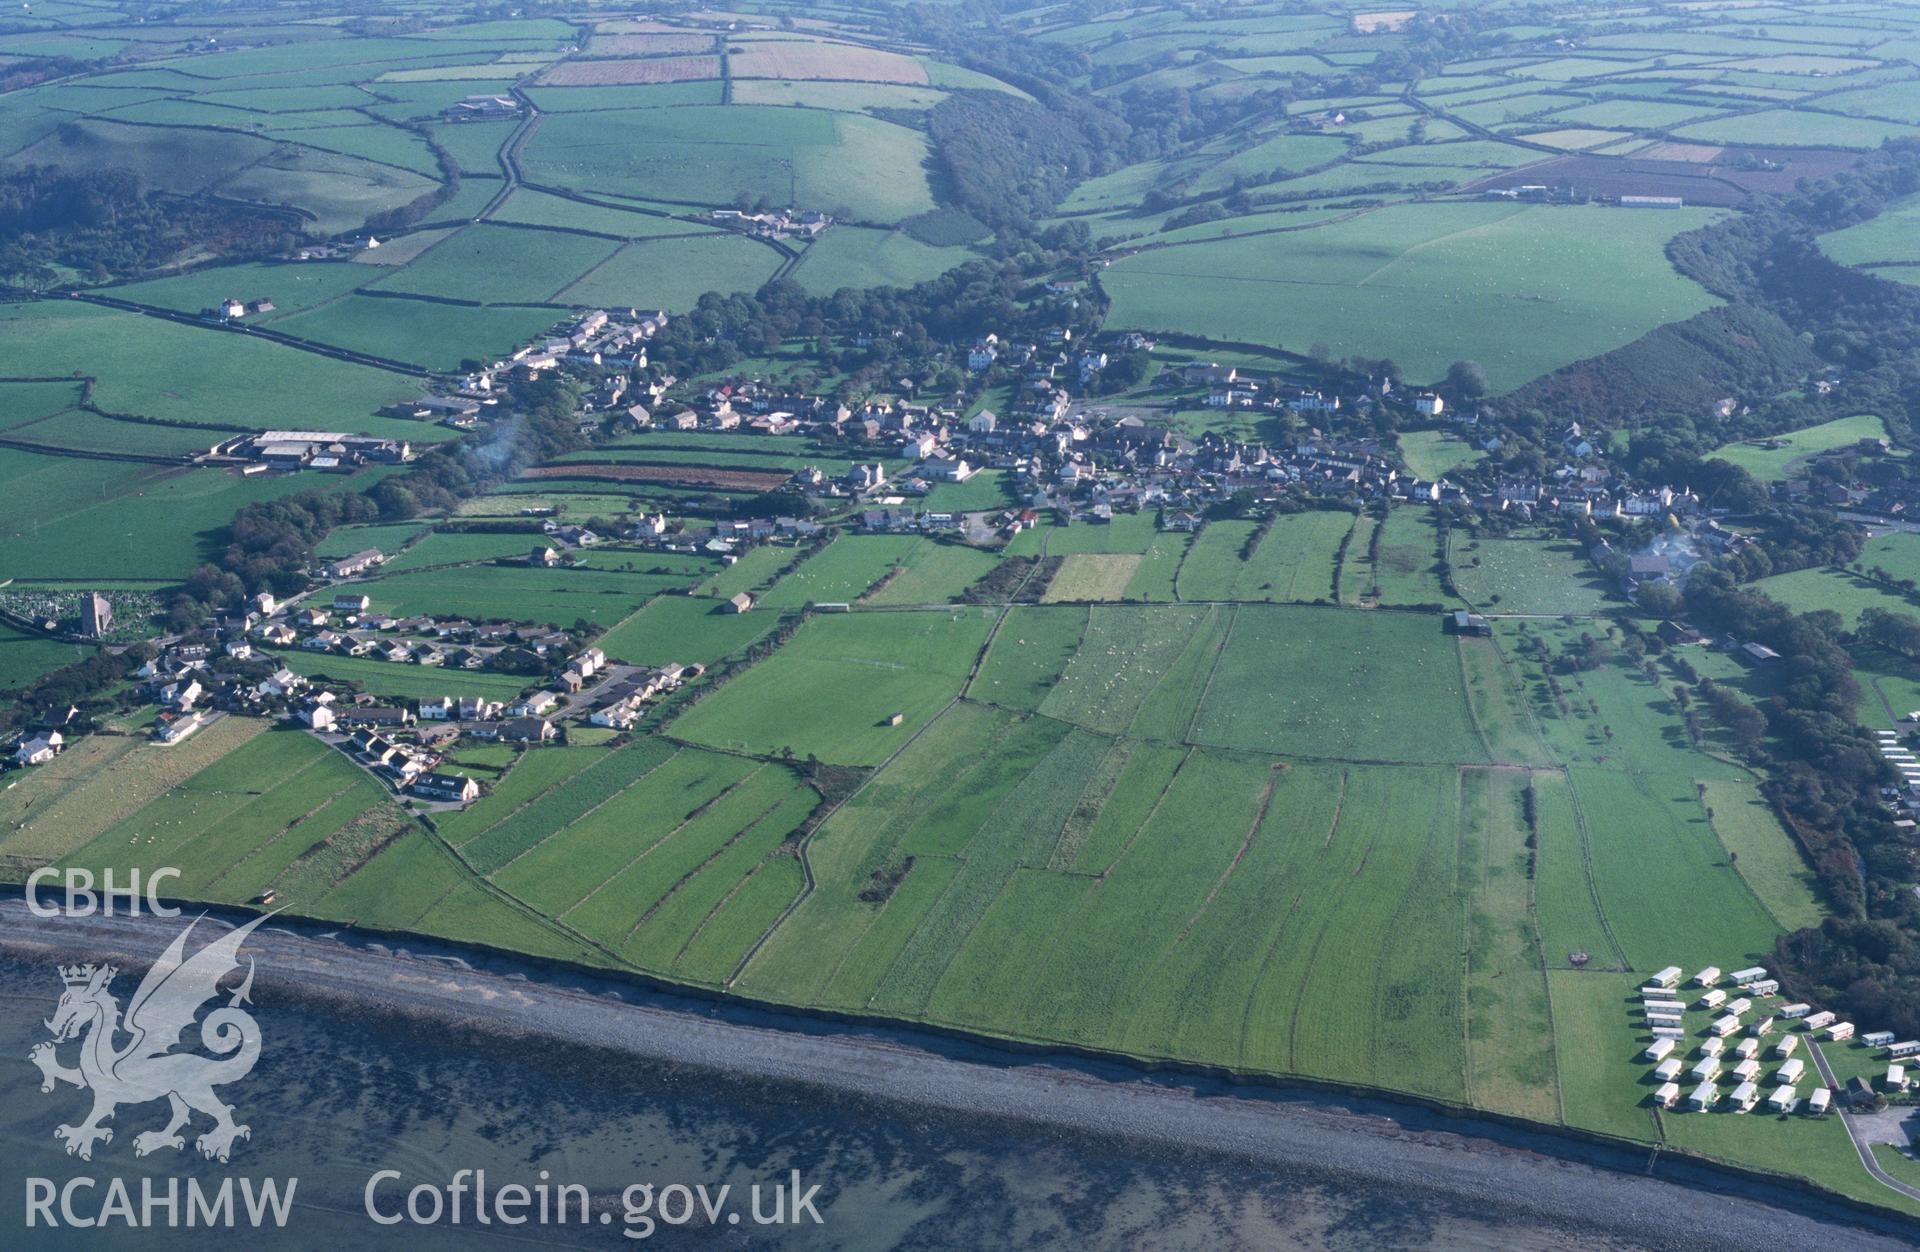 Slide of RCAHMW colour oblique aerial photograph of Llanon, taken by T.G. Driver, 19/10/1999.